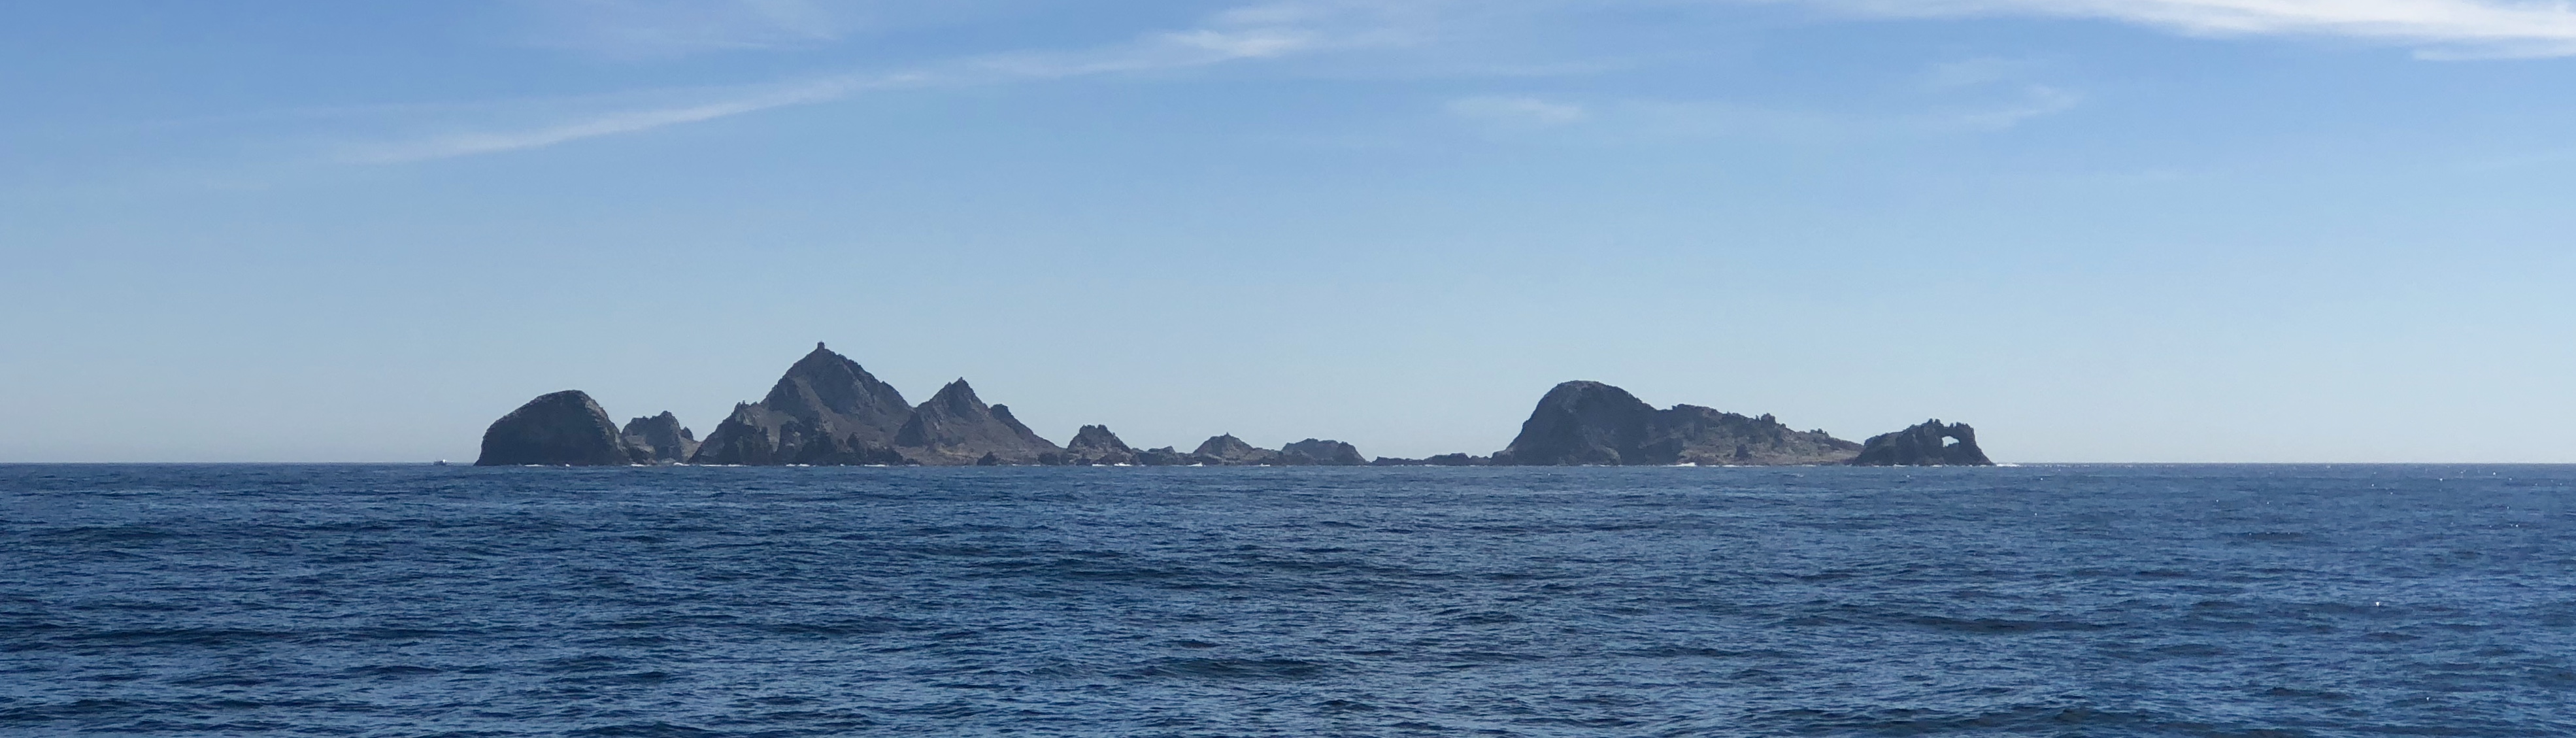 Farallon Islands rising out of the ocean water